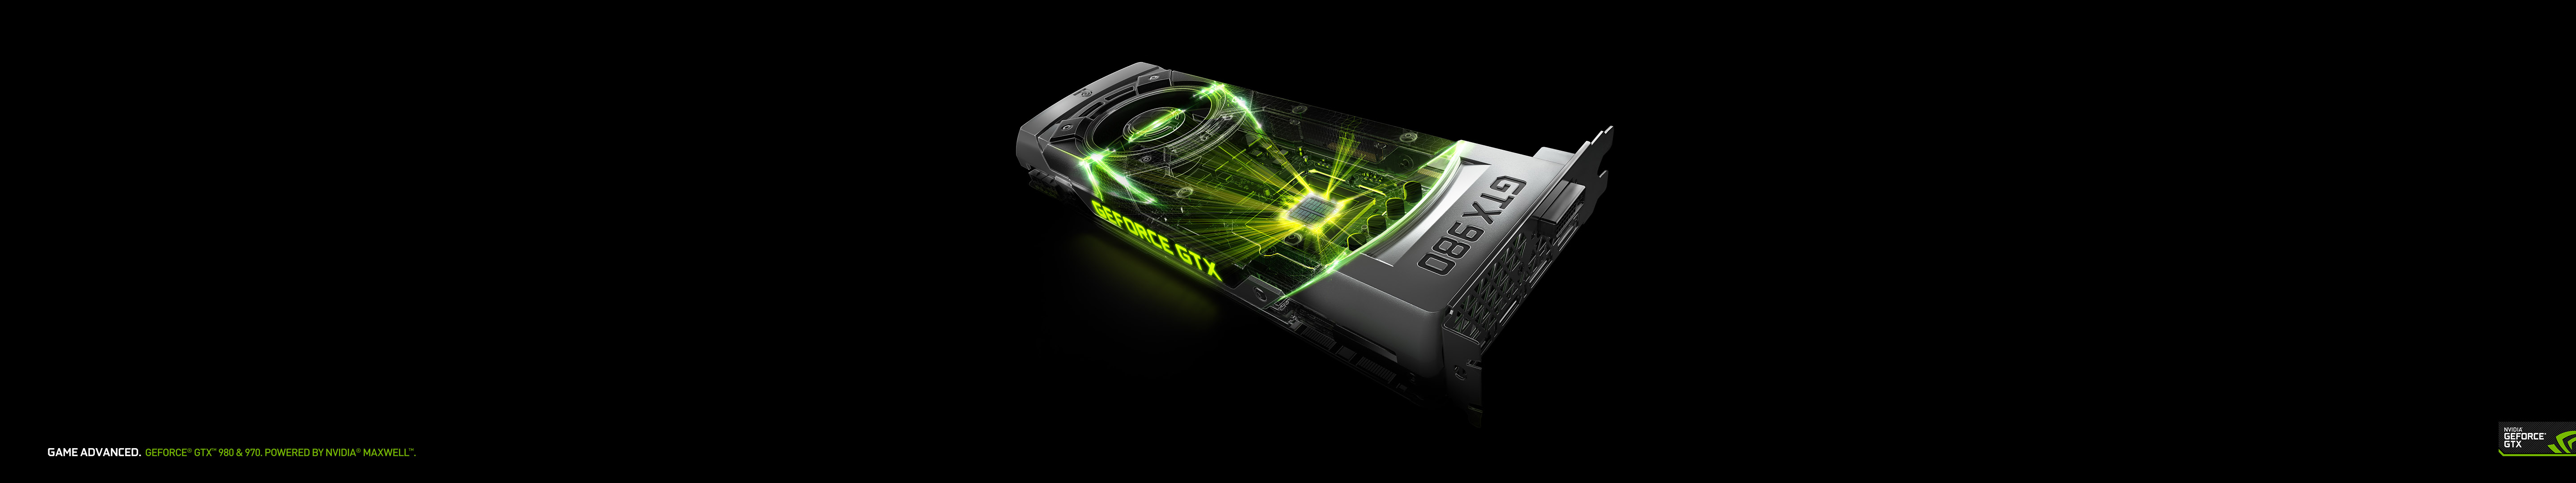 Free Download Wallpaper Download Demos Wallpapers And Screensavers Nvidia Cool 5760x1080 For Your Desktop Mobile Tablet Explore 37 Nvidia Surround Wallpapers 5760x1080 High Resolution Wallpaper Nvidia Wallpaper 3440x1440 5760 X 1080